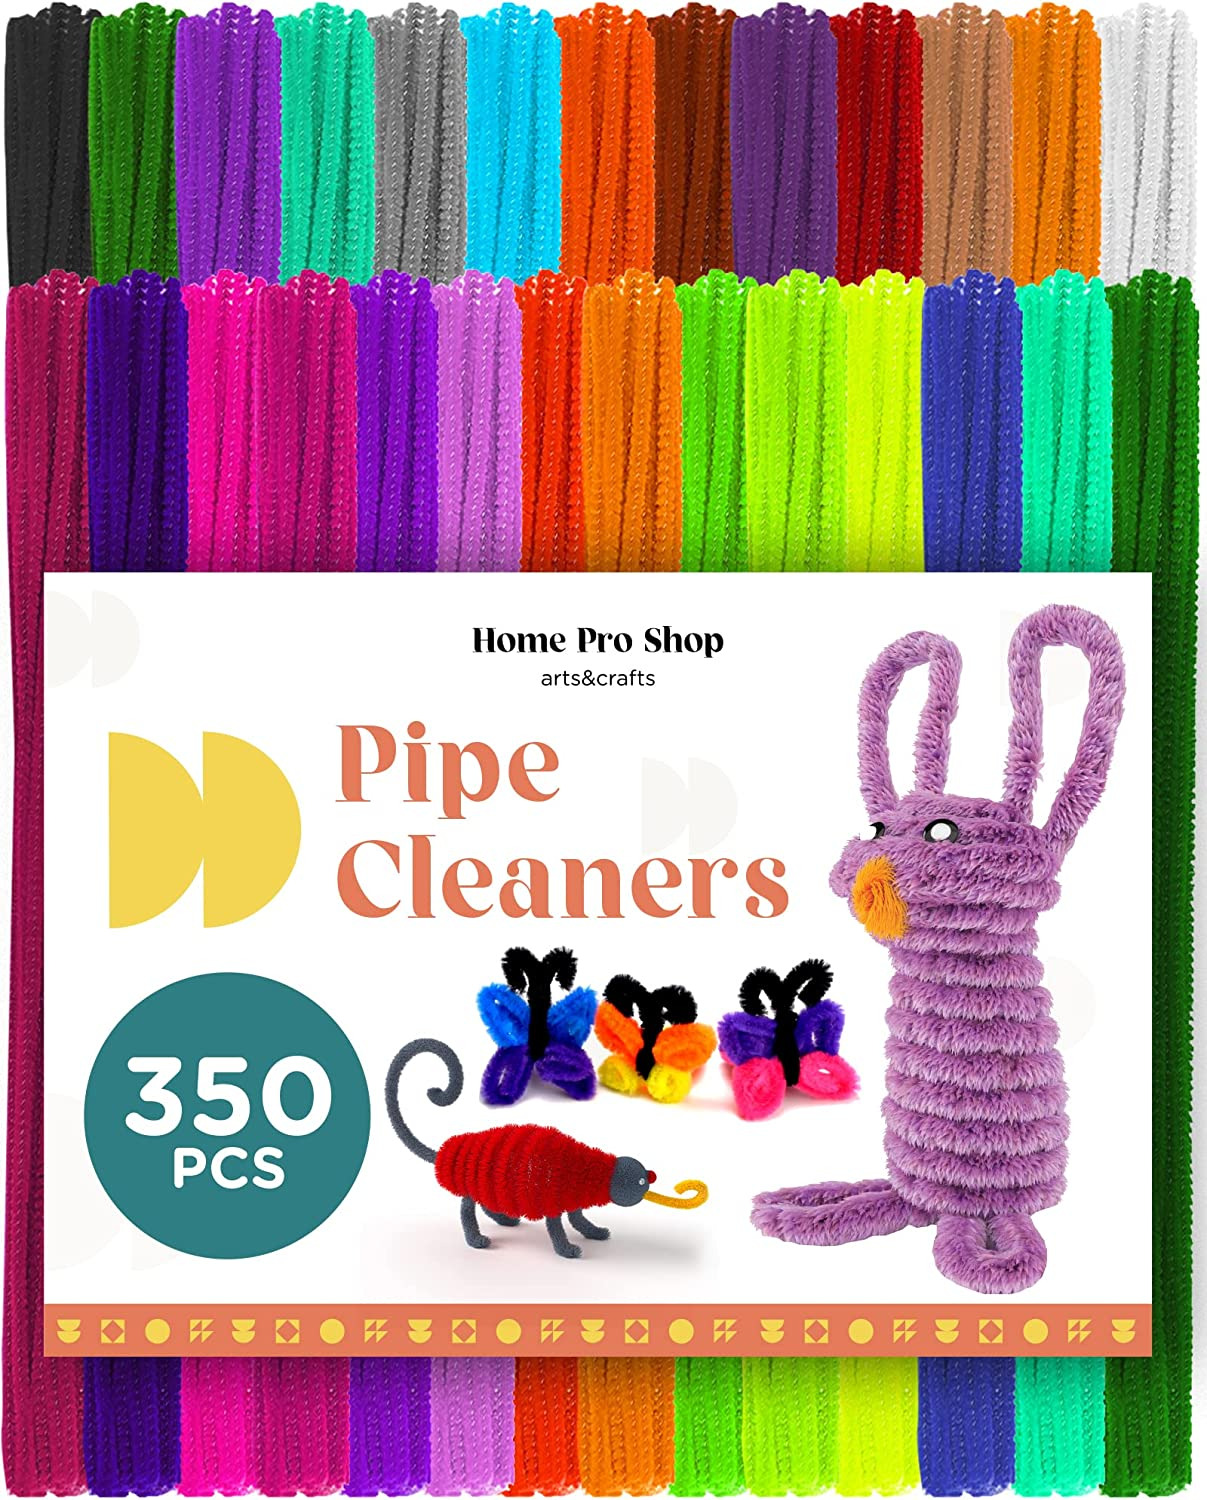 Homeproshop 350 Pcs Pipe Cleaners Craft Supplies - 6mm 12inch Chenille Stems/cra